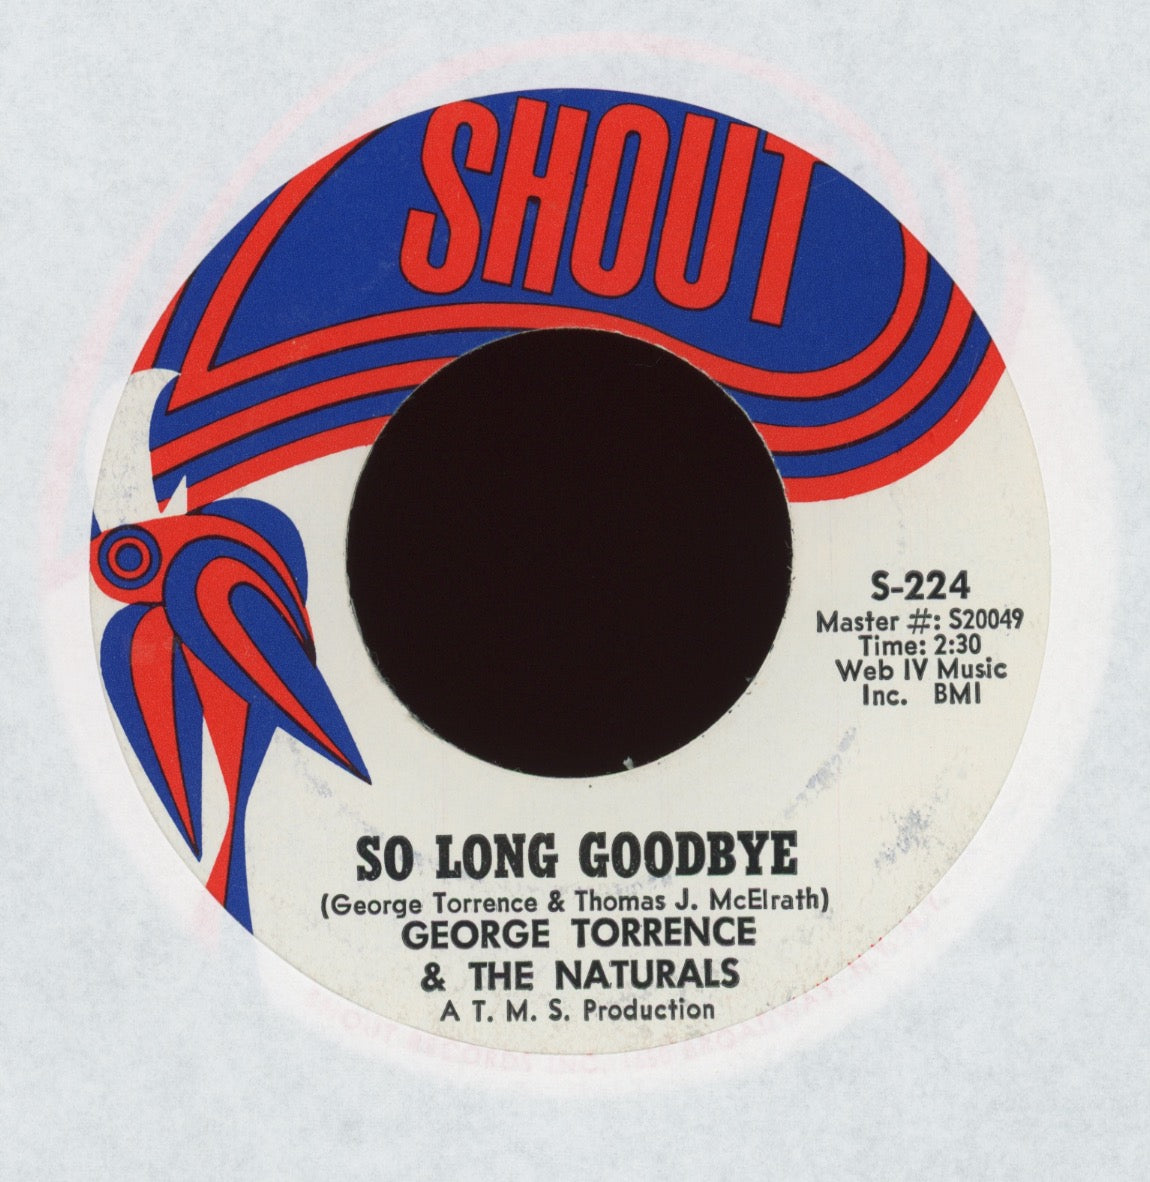 George Torrence & The Naturals - Lickin' Stick on Shout Funk 45